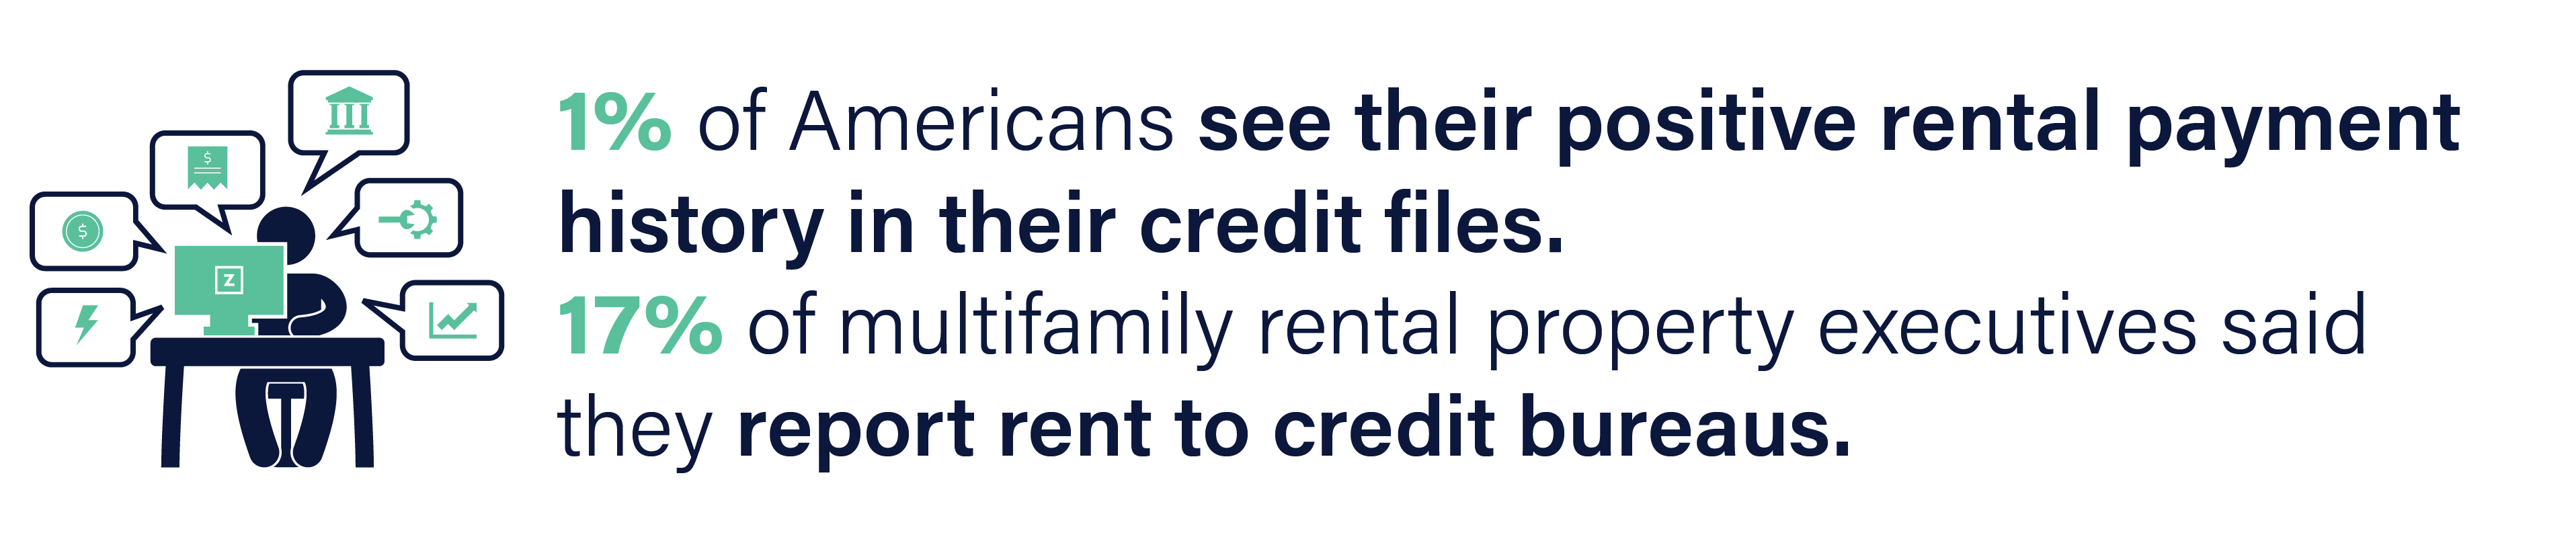 how many residents see positive rental payment history on their credit